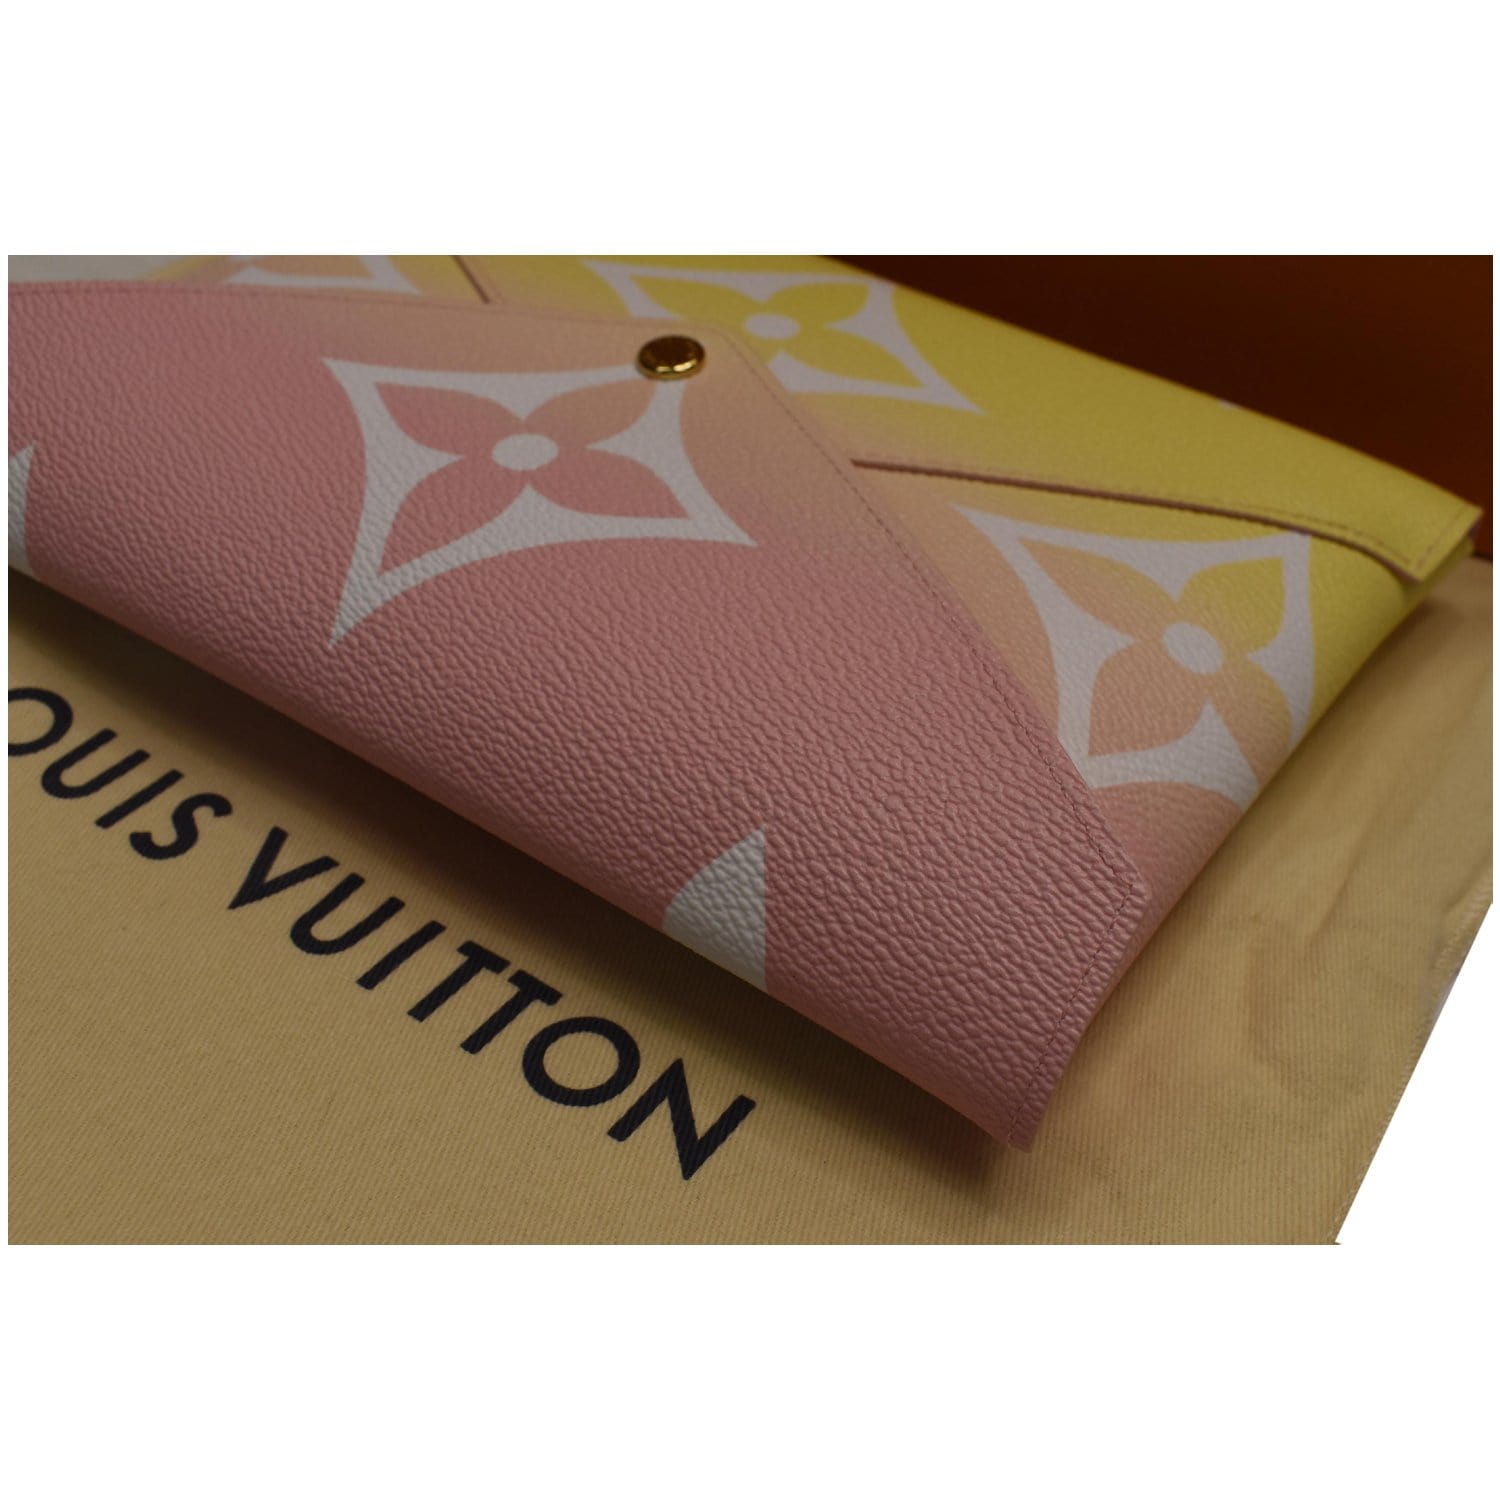 LOUIS VUITTON By The Pool Kirigami Large Monogram Giant Clutch Light P